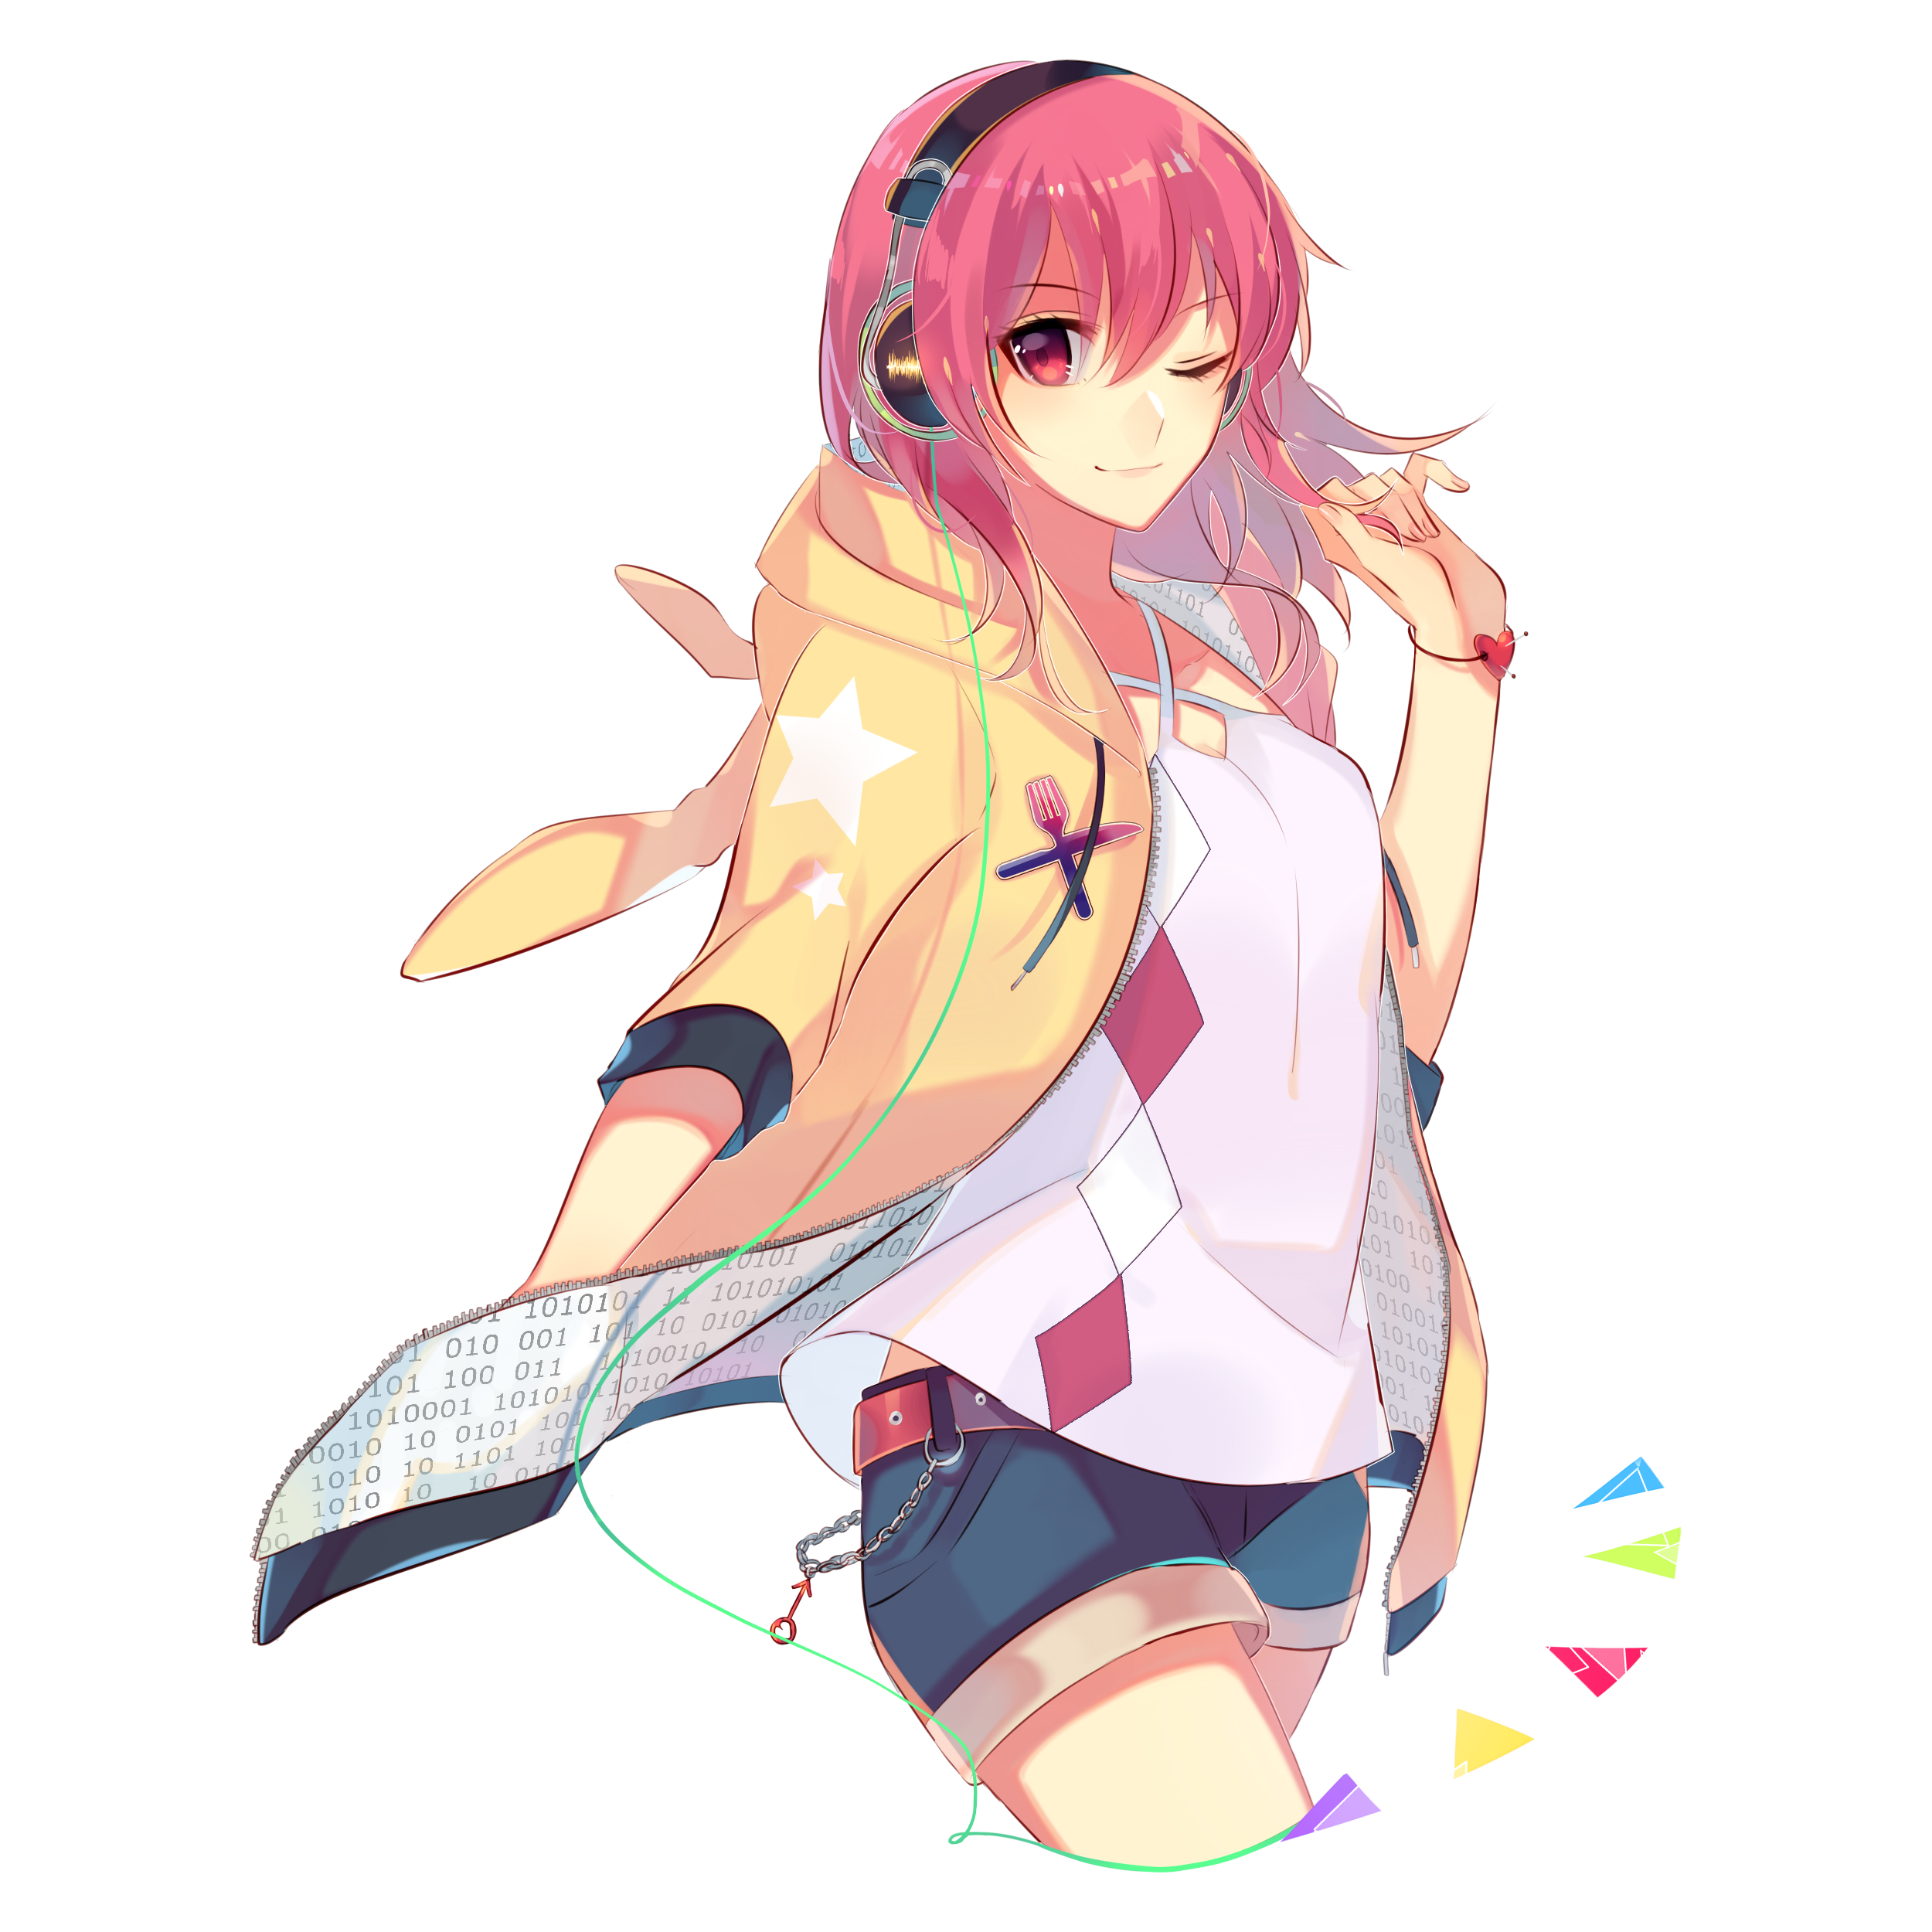 Song: Hide and seek  Anime character design, Vocaloid, Anime